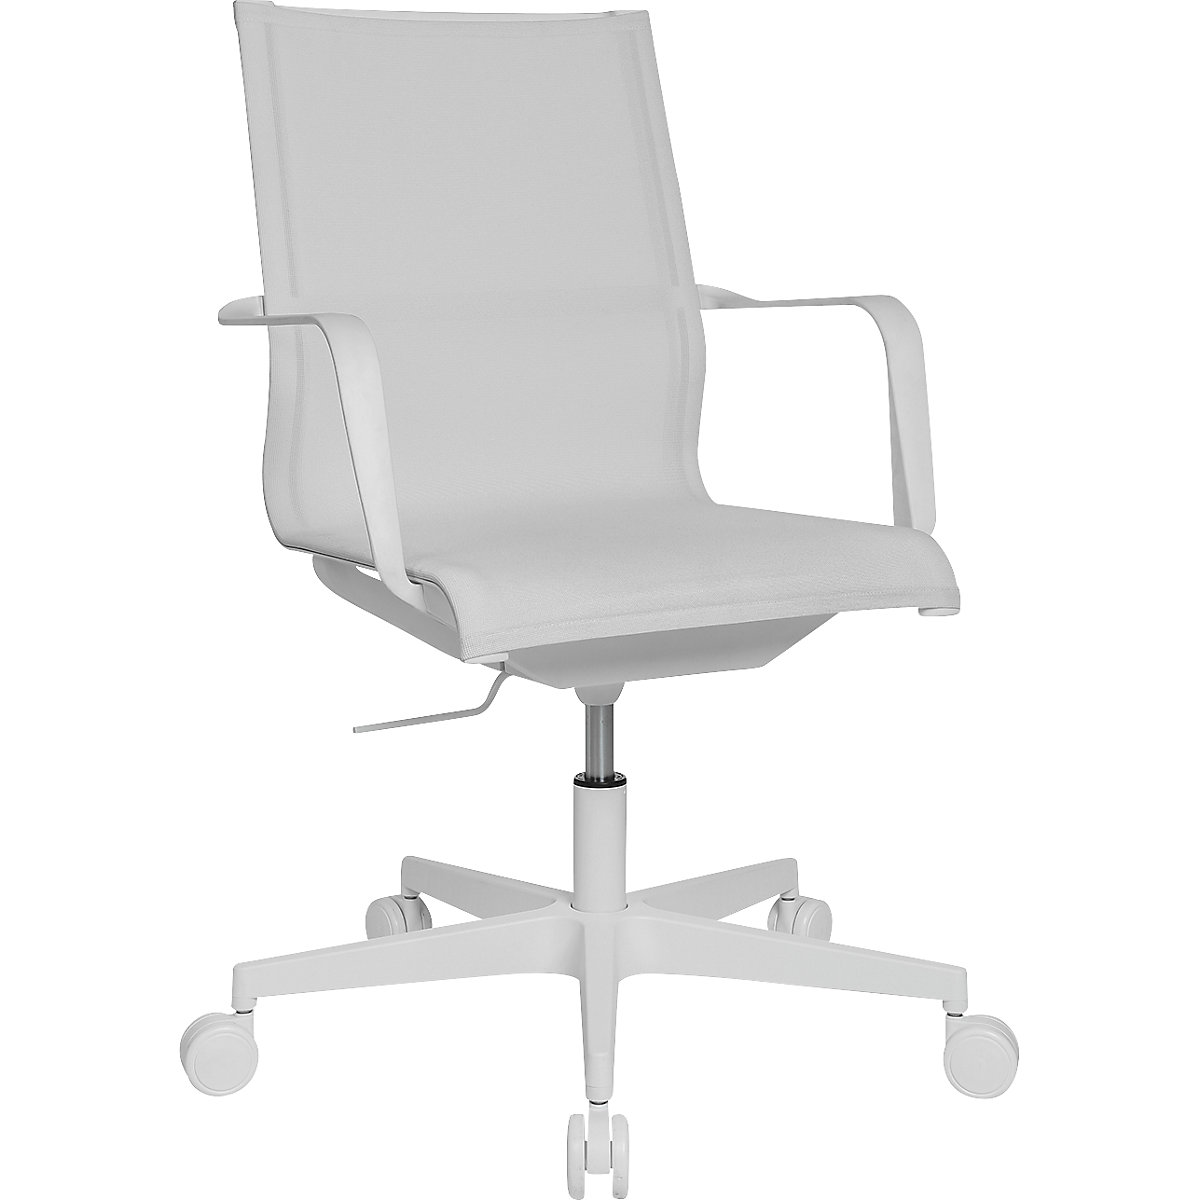 SITNESS LIFE 40 office swivel chair – Topstar, with arm rests and SITNESS joint, white-8